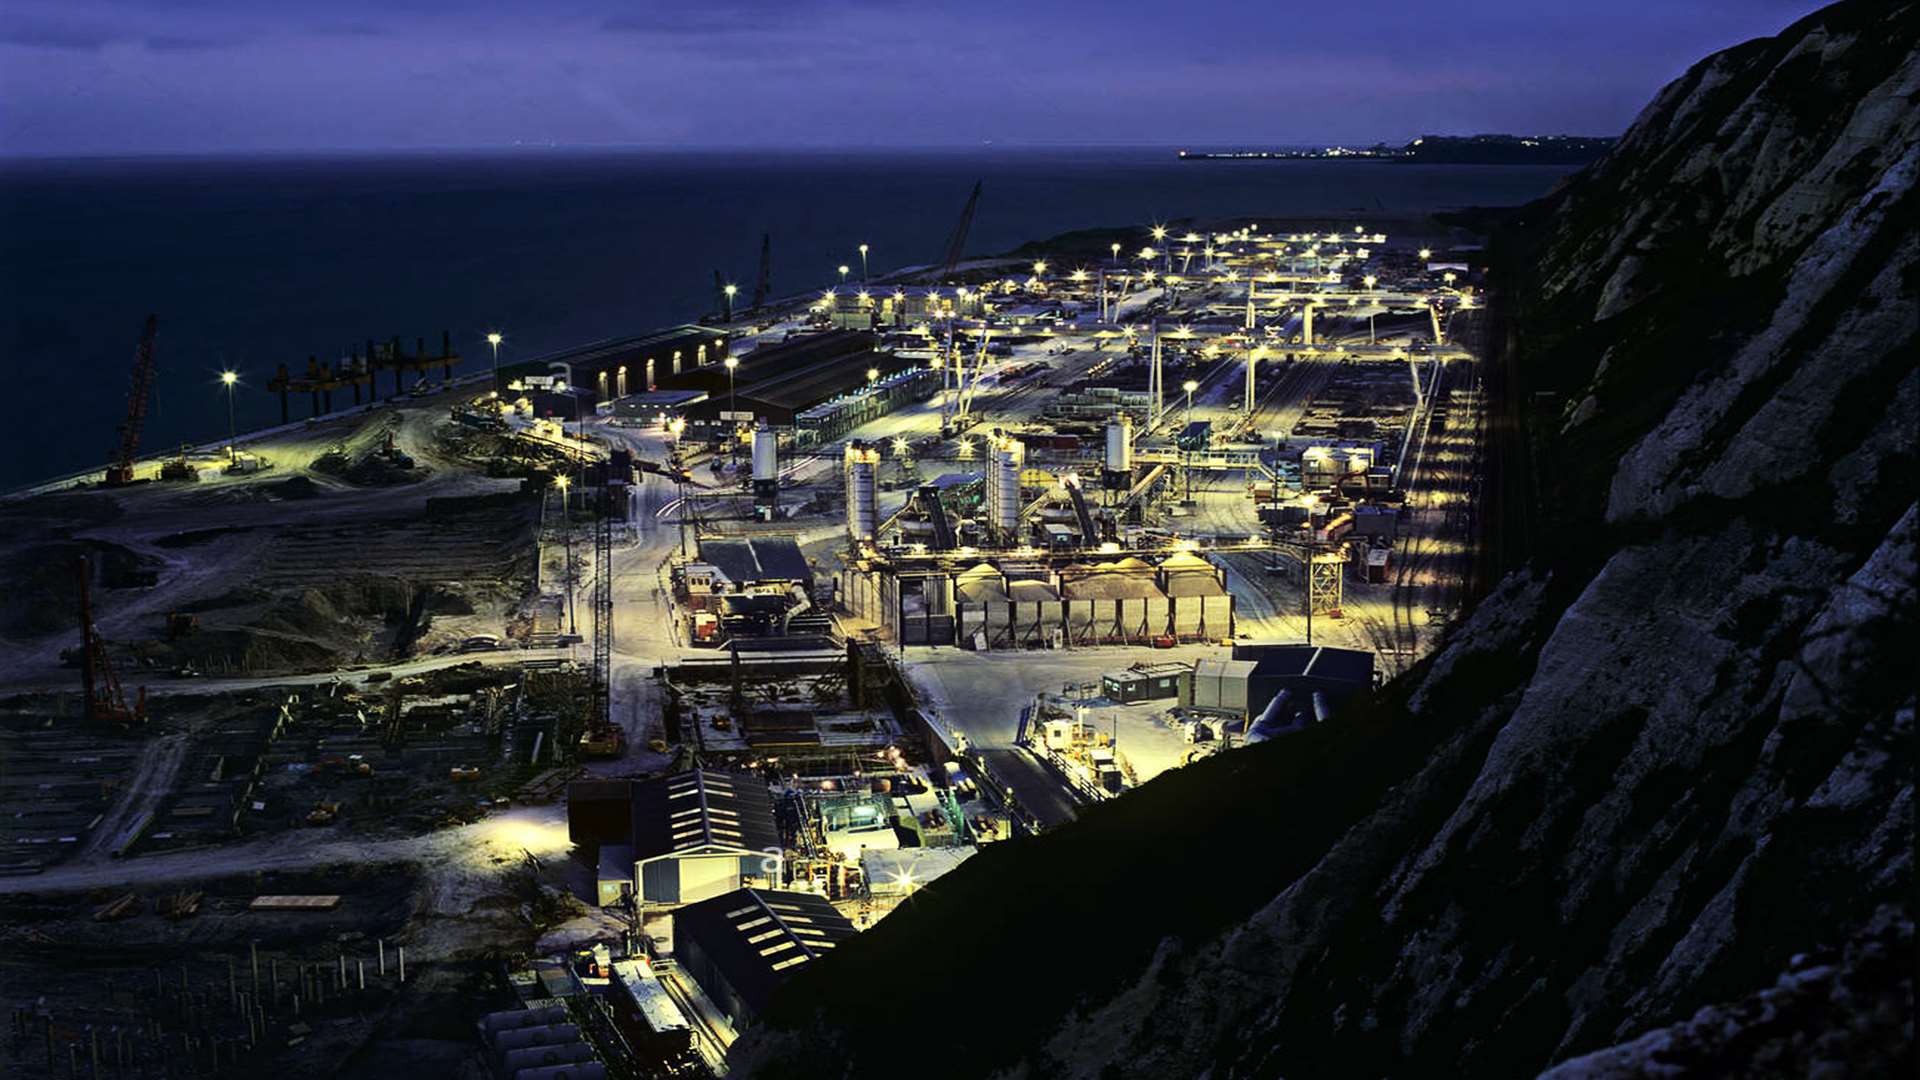 An image of Samphire Hoe as it would have looked during the Channel Tunnel construction